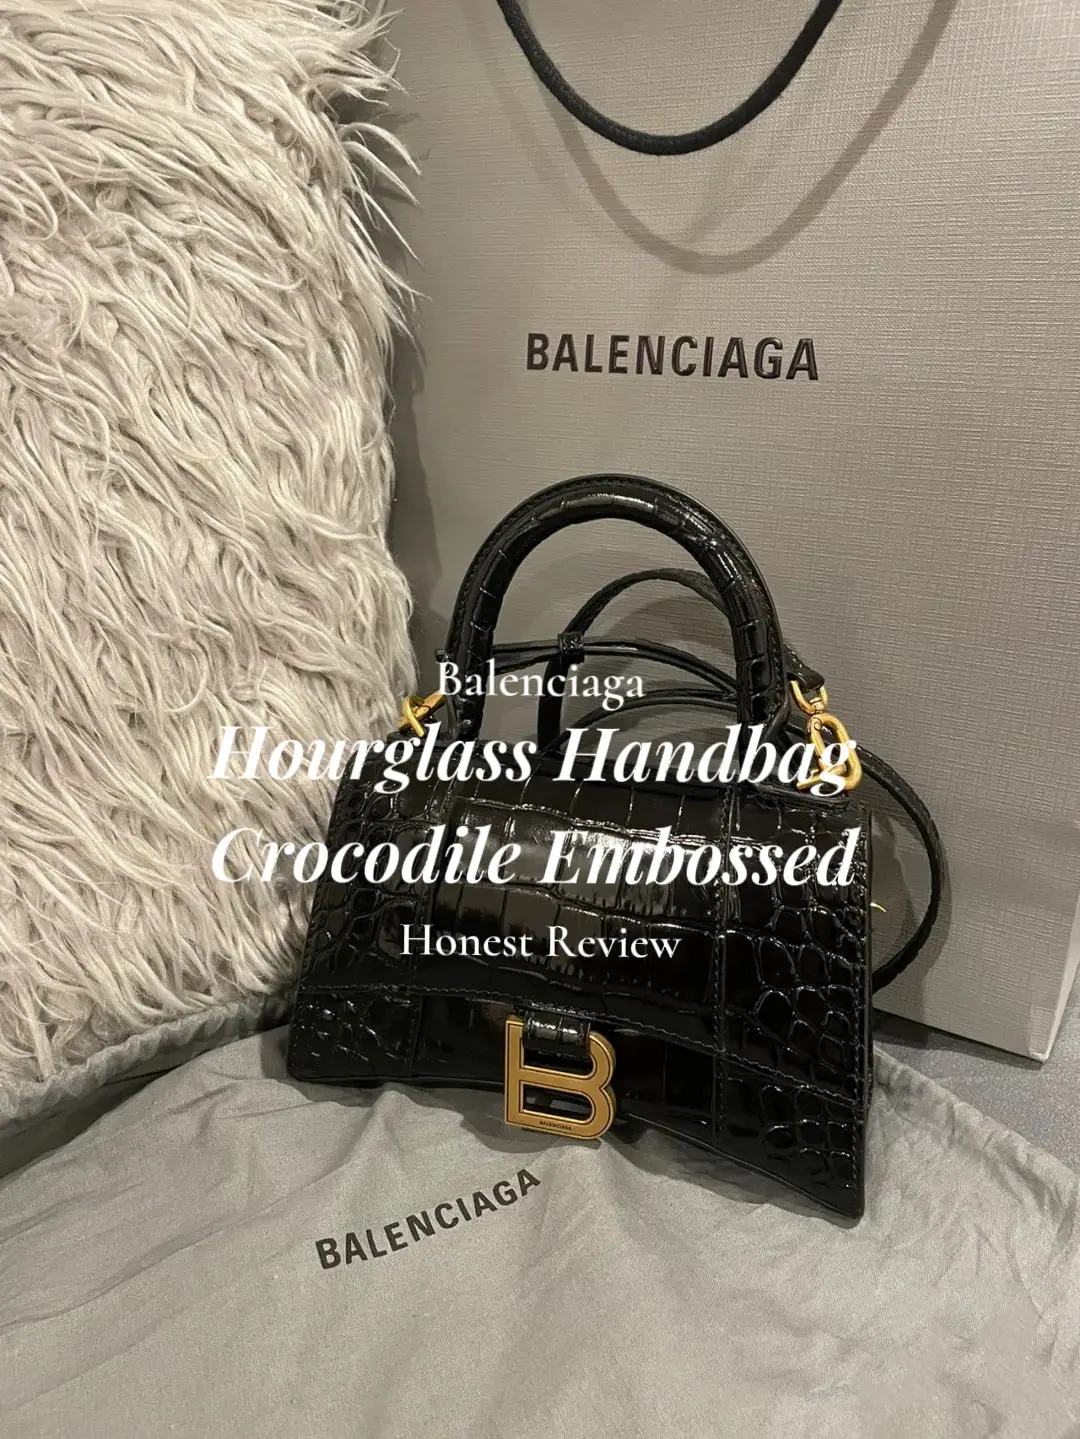 BALENCIAGA HOURGLASS XS & SMALL UNBOXING AND COMPARISON 